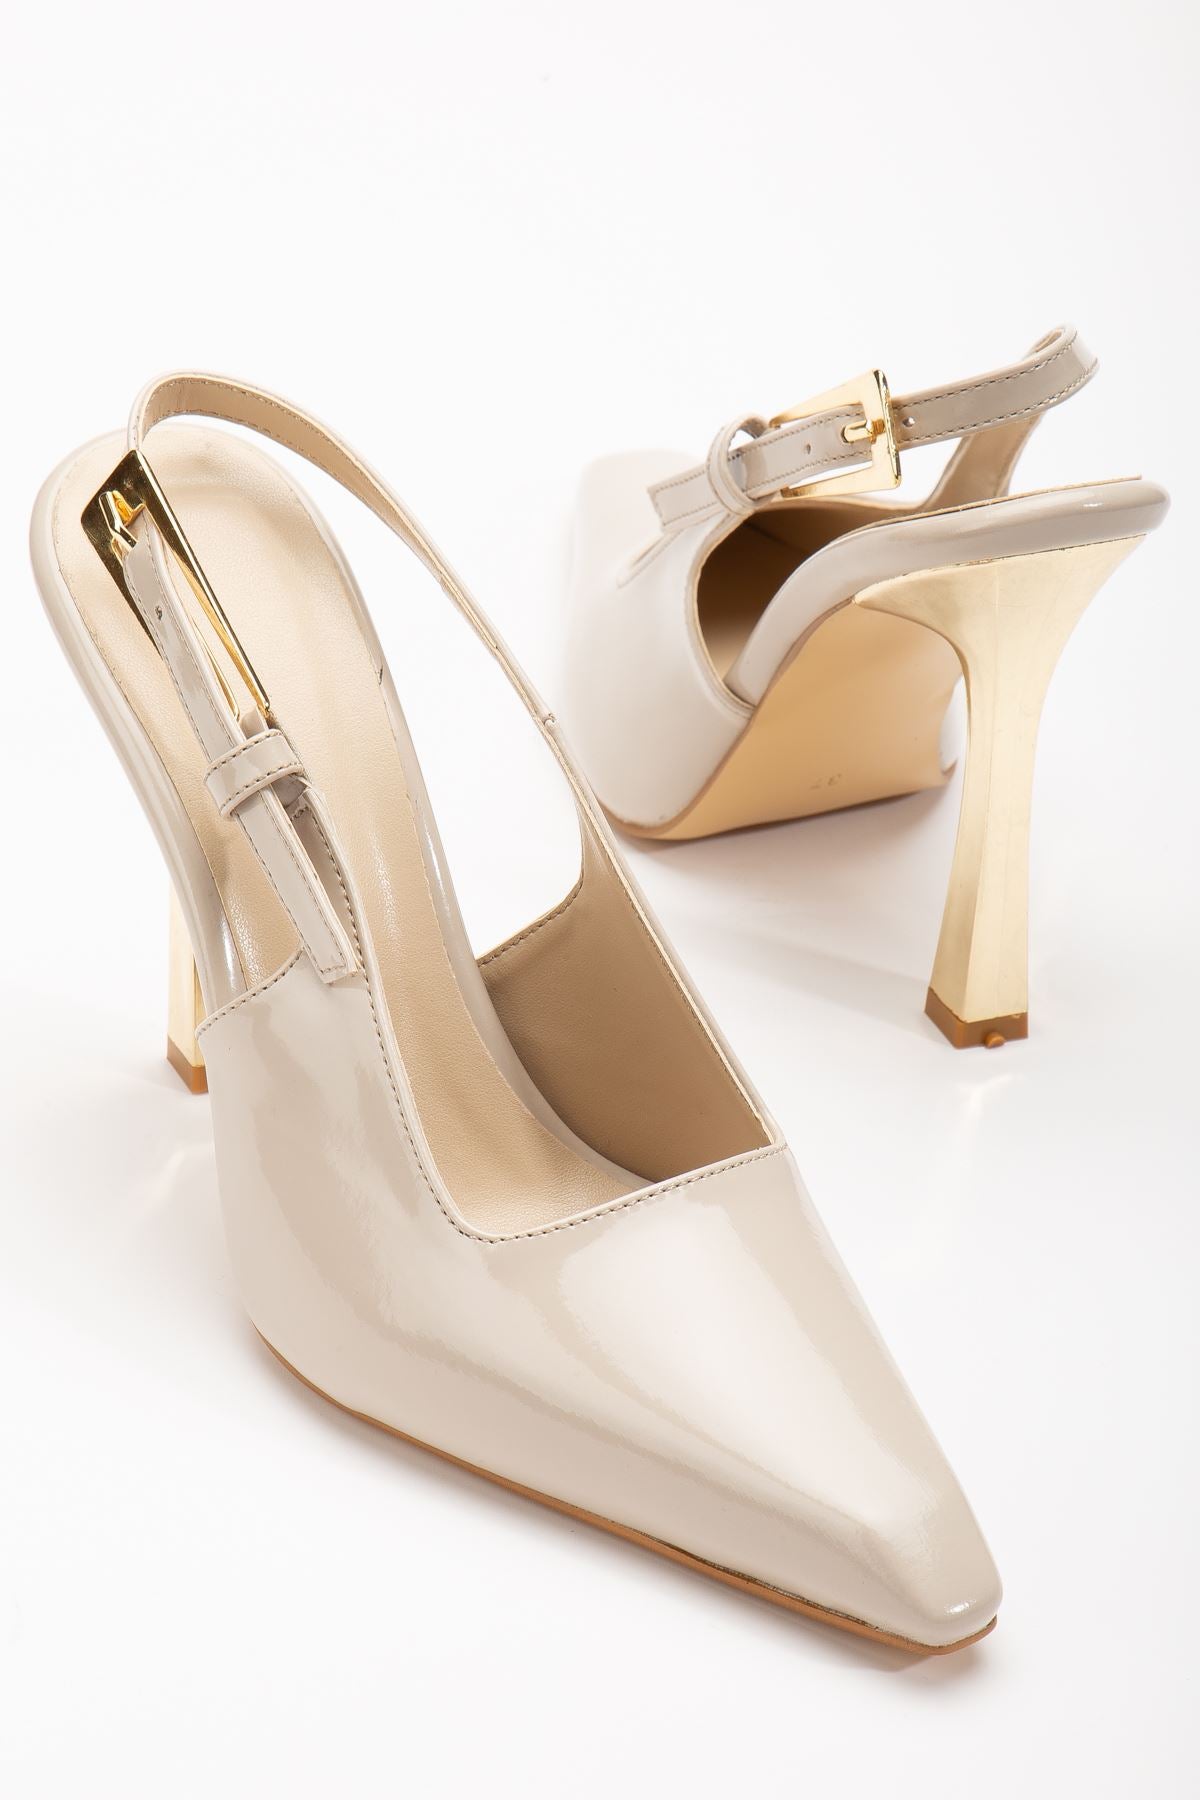 Minni Beige Patent Leather Gold Detailed Blunt Toe Women's Heeled Shoes - STREETMODE™